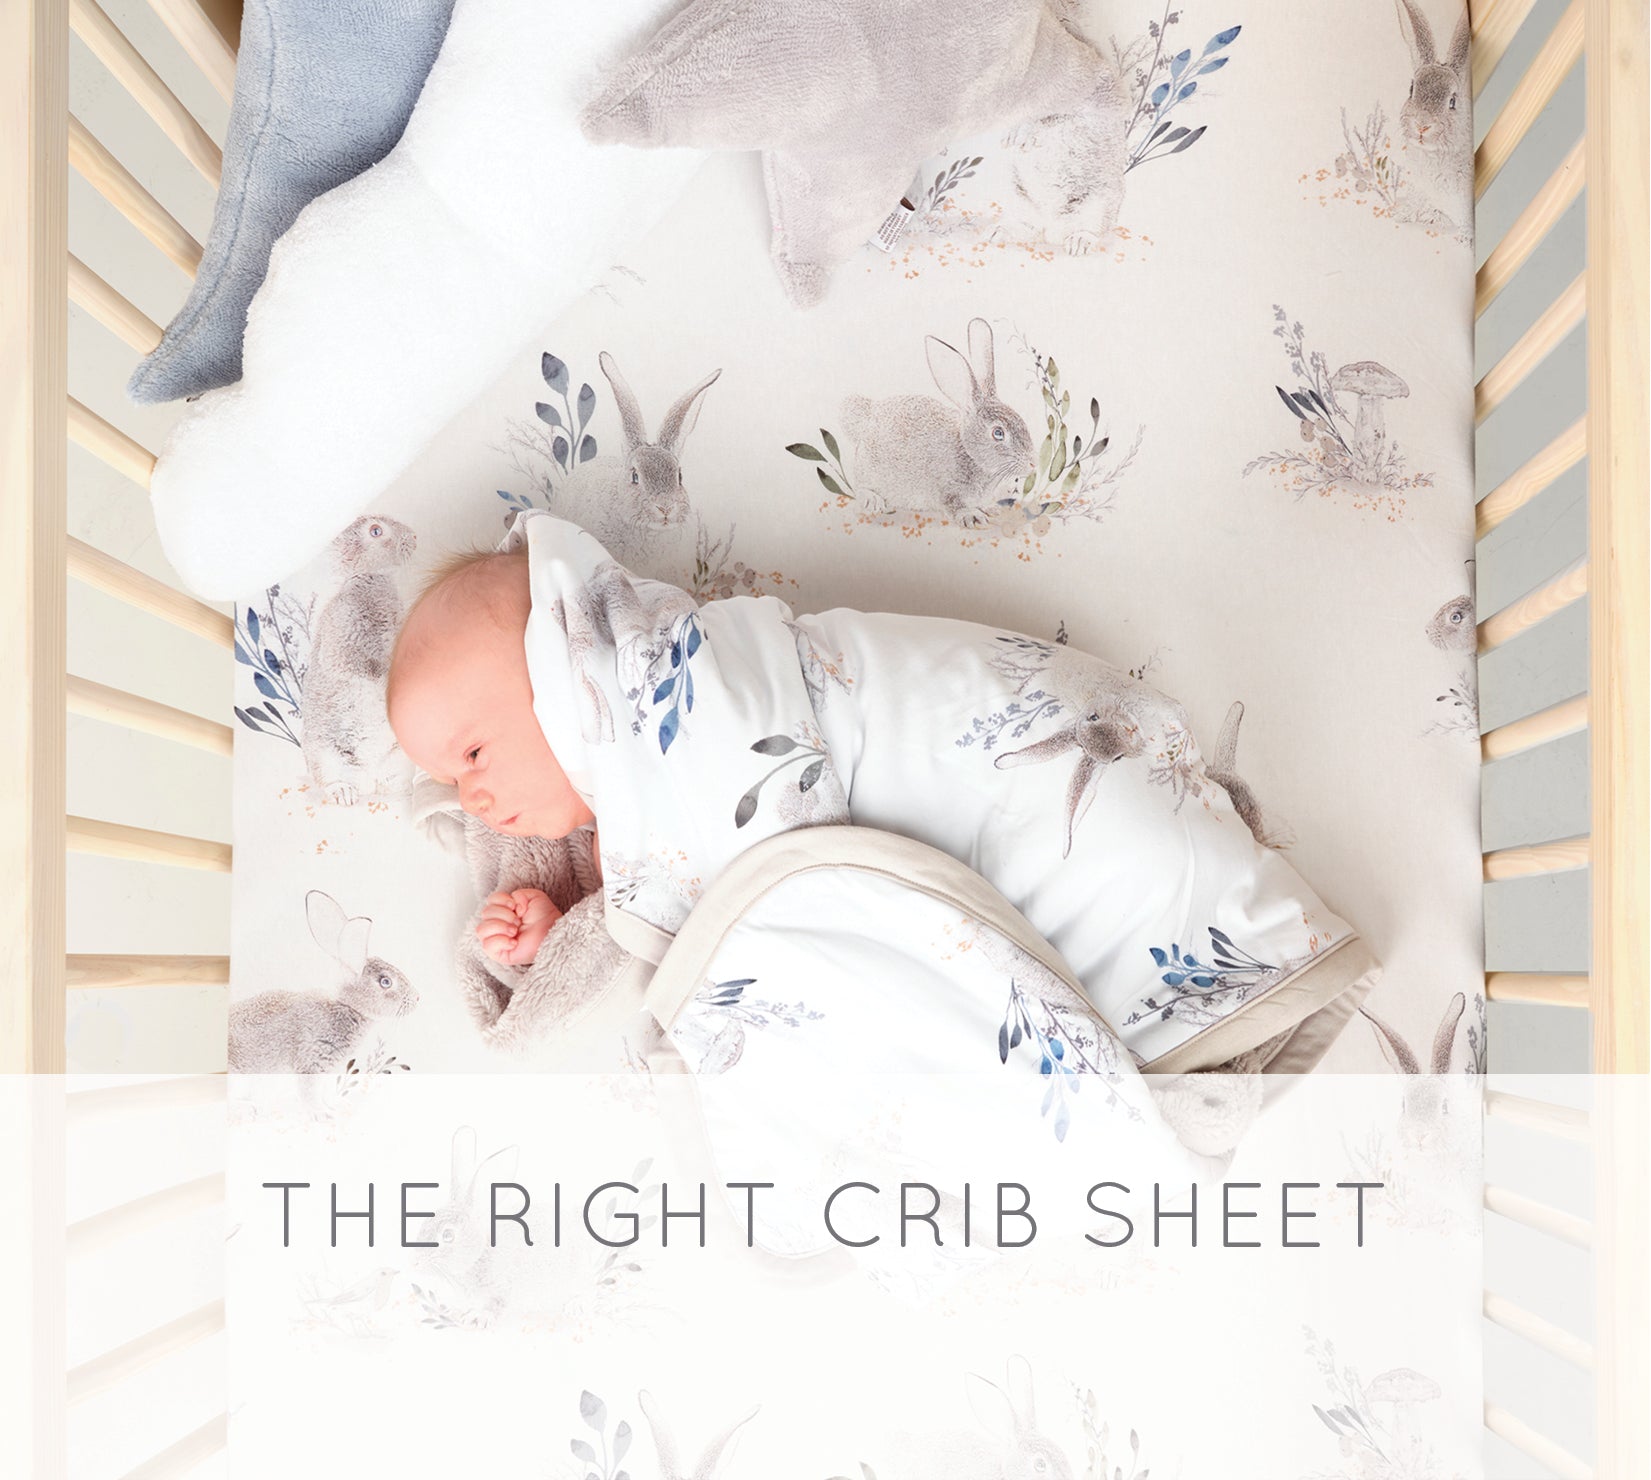 Choosing the Right Crib Sheet and Size